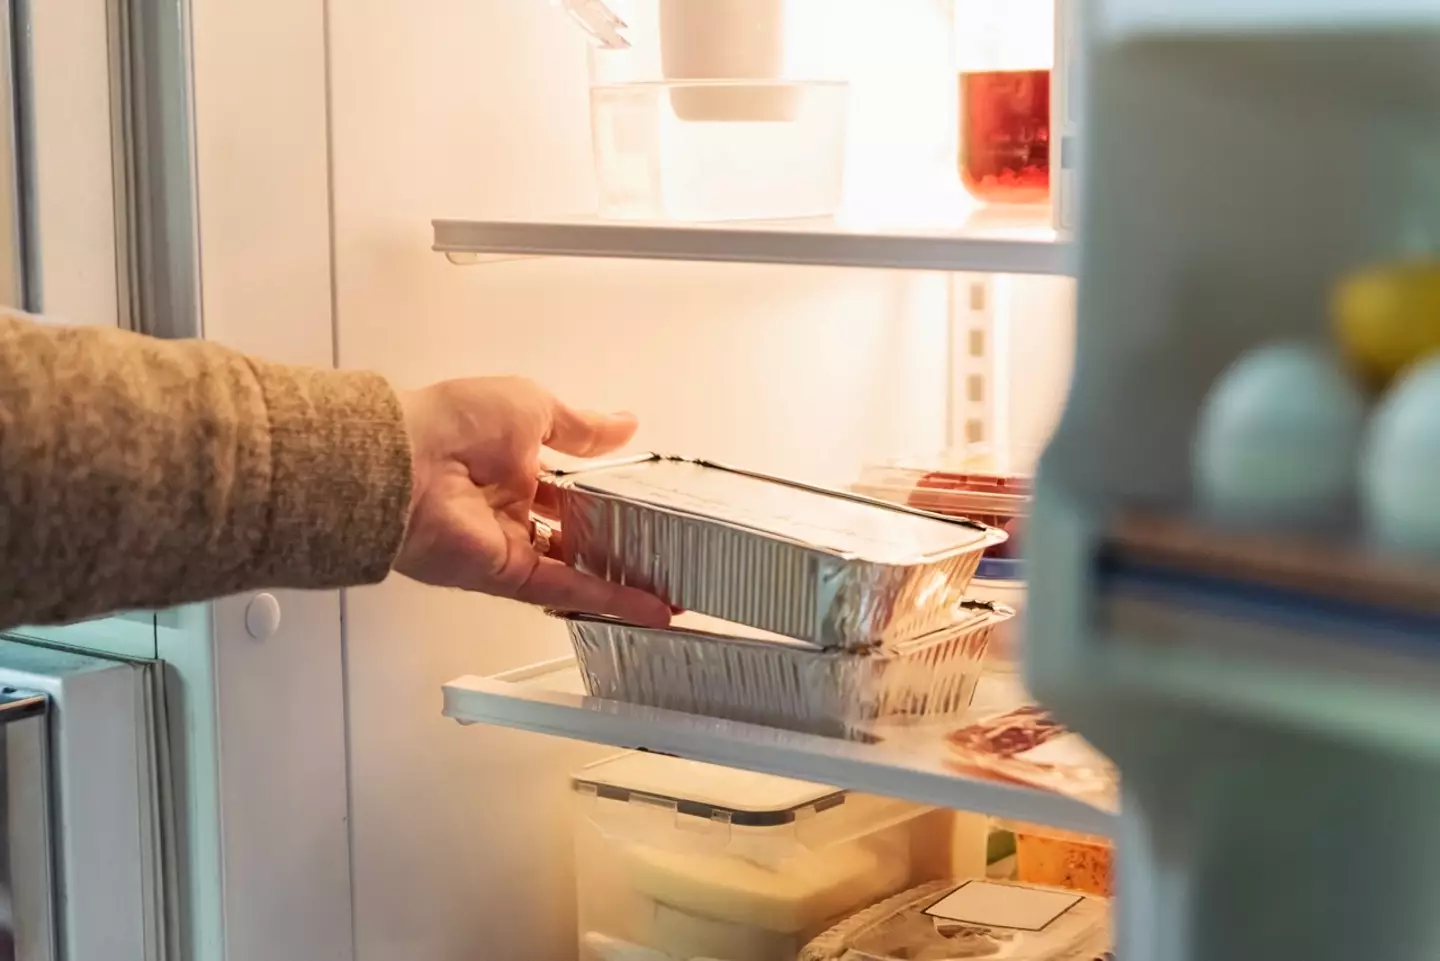 Is it right to put warm food straight in the fridge when you're wanting to store left overs?